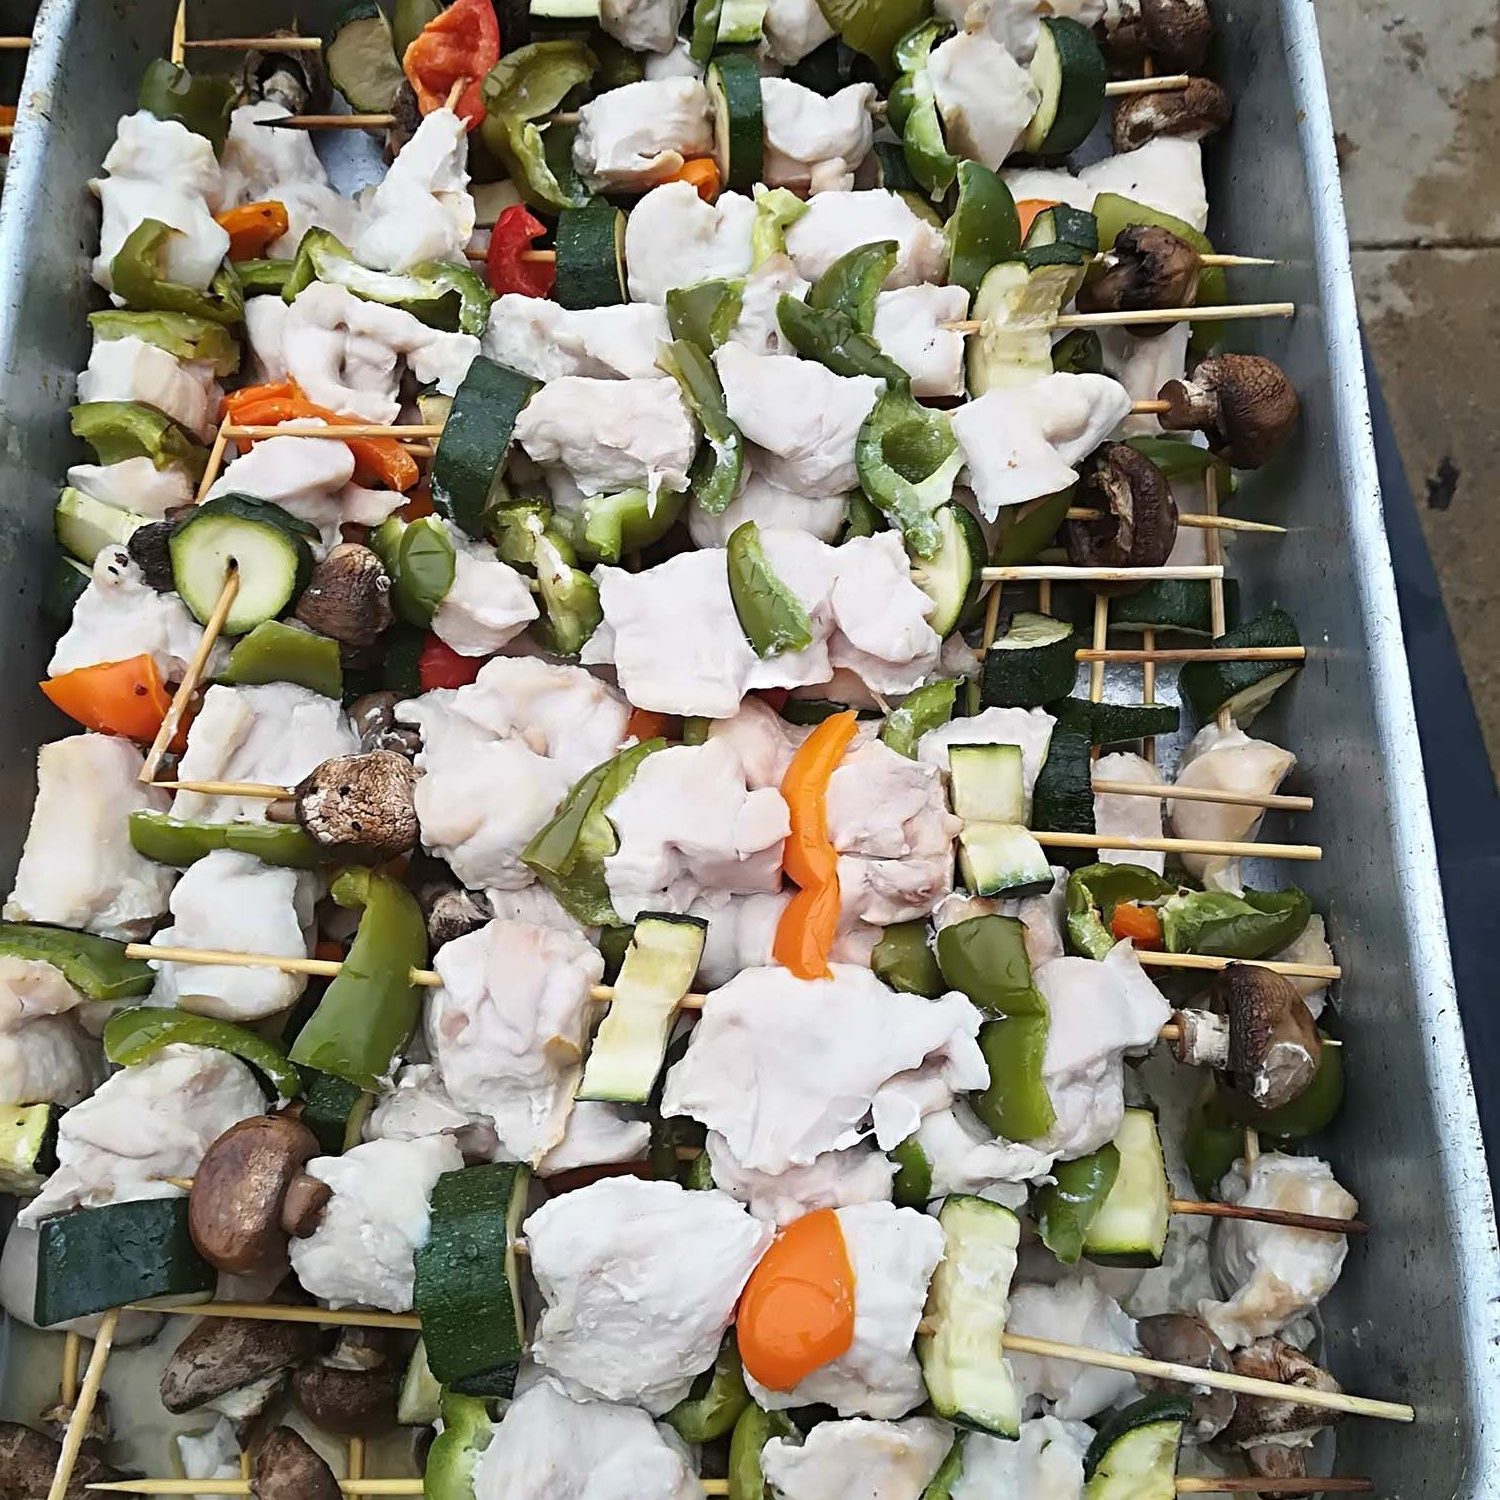 Raw chicken kebabs prepared for cooking